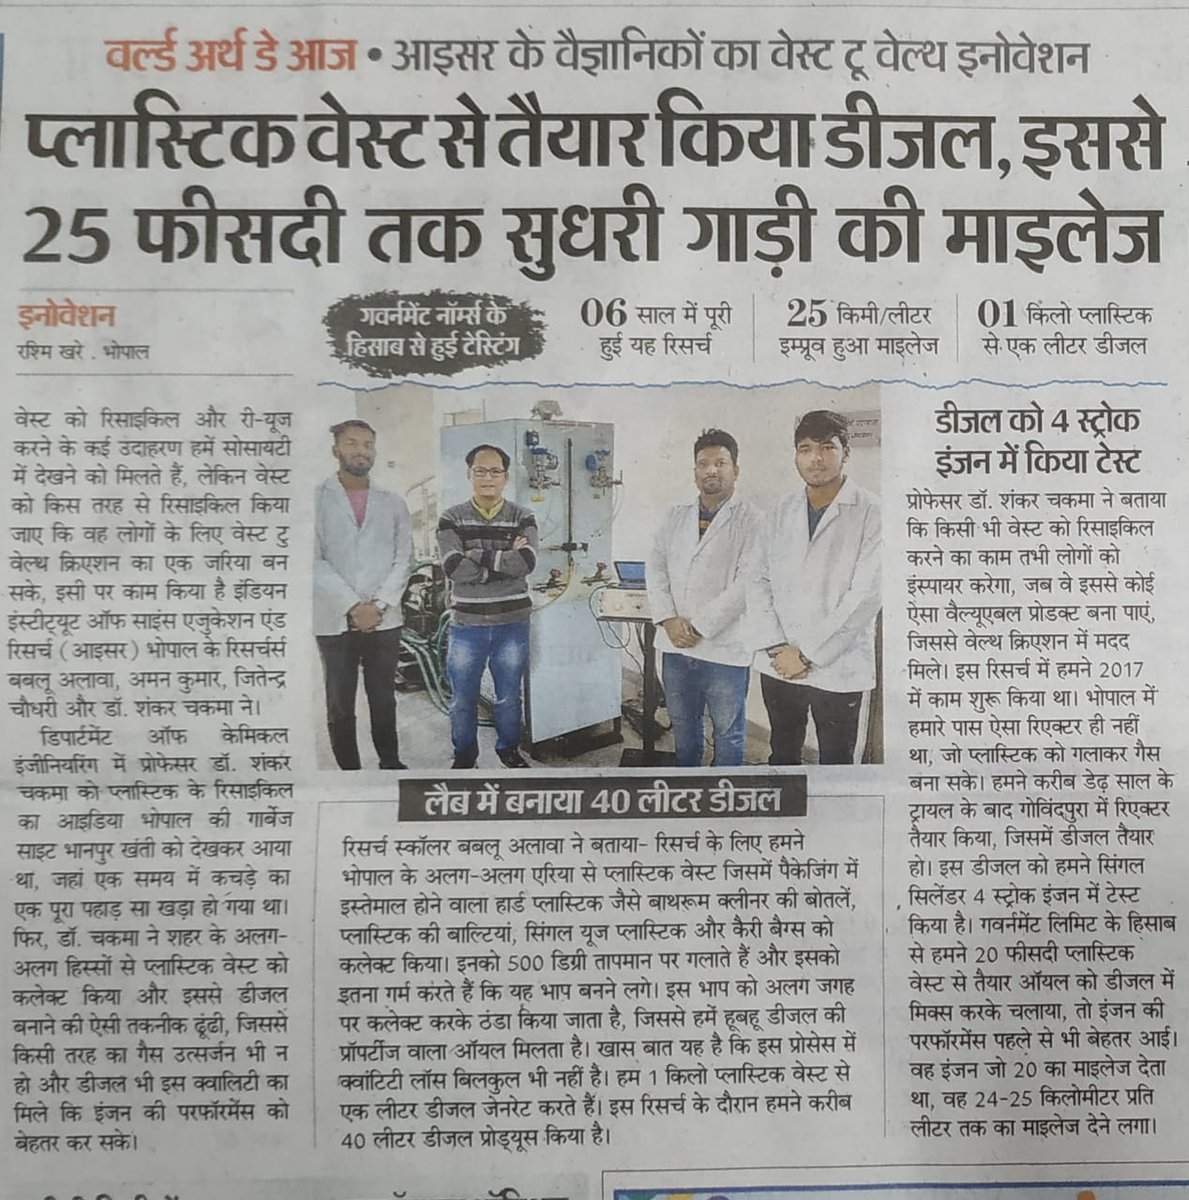 The research work on 'Waste-to-Wealth' carried out by Dr. Sankar Chakma's research group from the Department of Chemical Engineering has been highlighted on World Earth Day. (News Clip: Dainik Bhaskar, April 24 2024) @sankarchakma